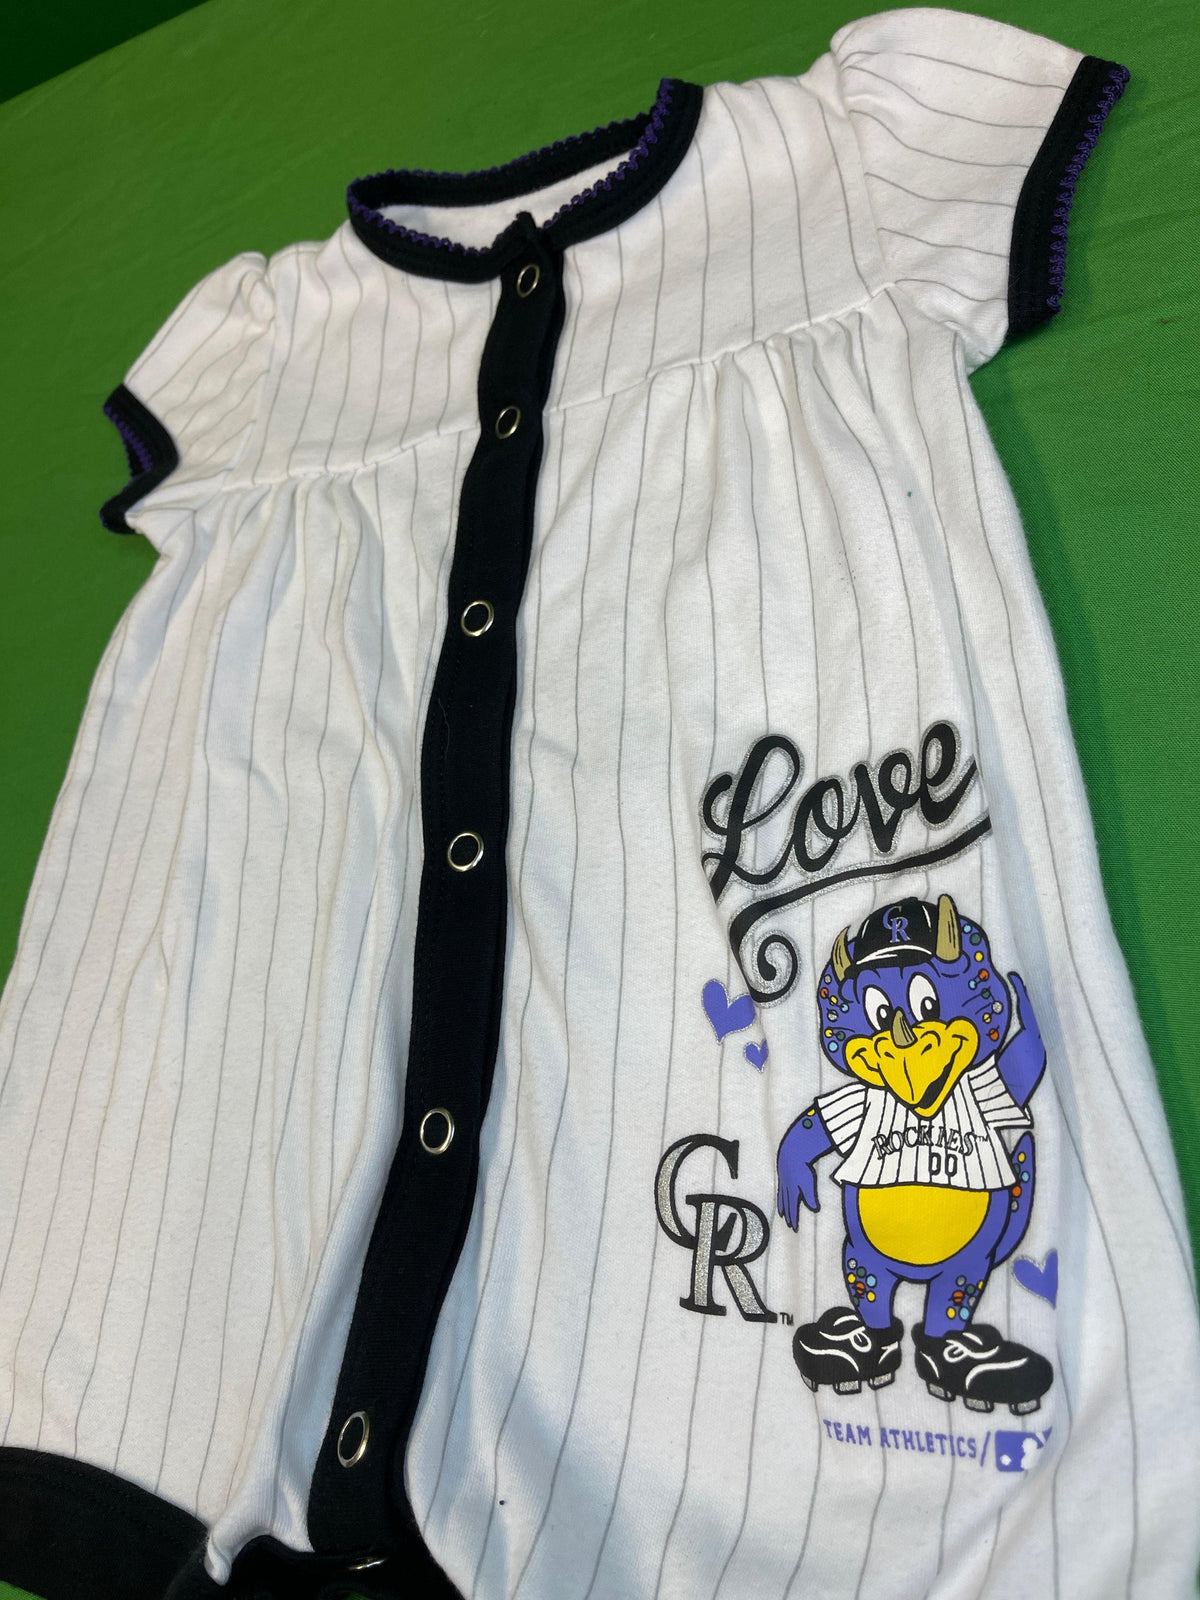 MLB Colorado Rockies Baby Girl Outfit Toddler 18 months